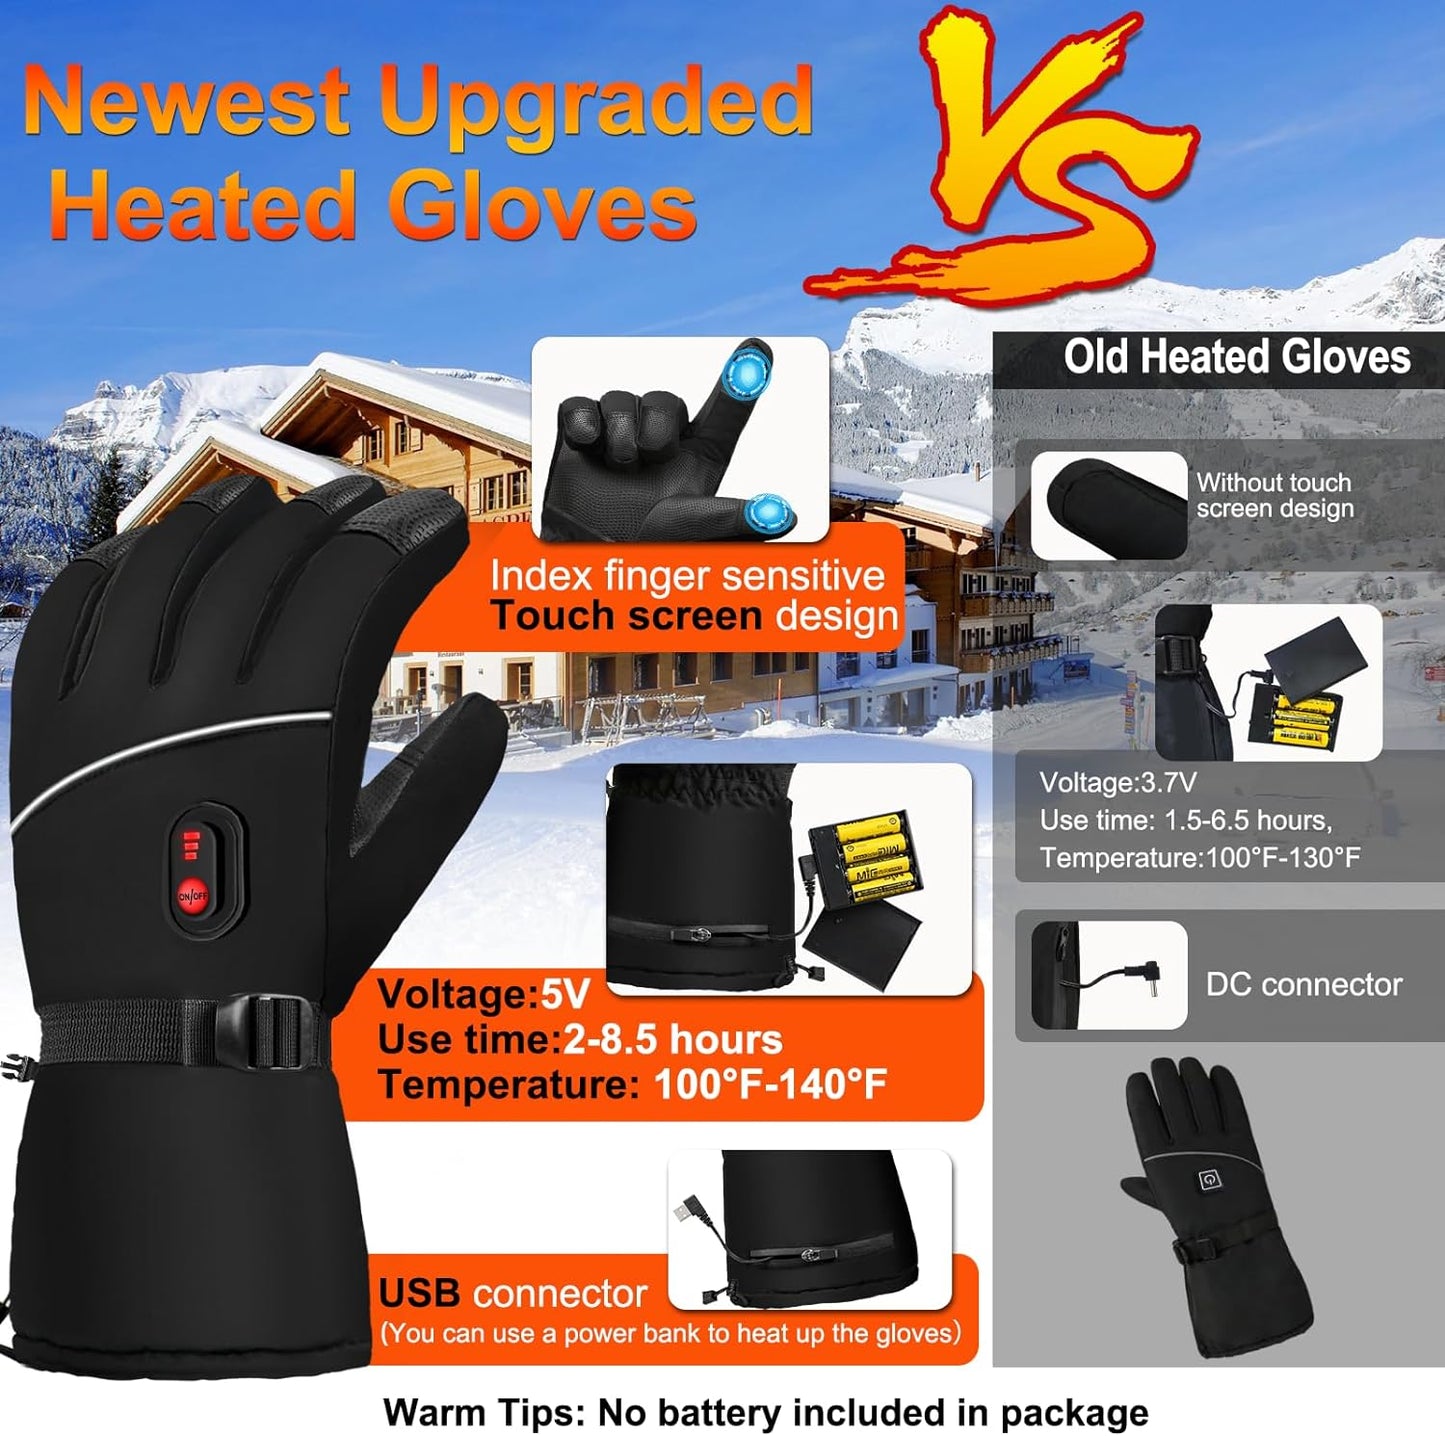 Heated Gloves for Men Women,Electric Heated Gloves Camping Hand Warmers Winter Warm Touchscreen Gloves - Battery Powered Waterproof Gloves Windproof Gloves for Outdoor Cycling Skiing Hiking Working